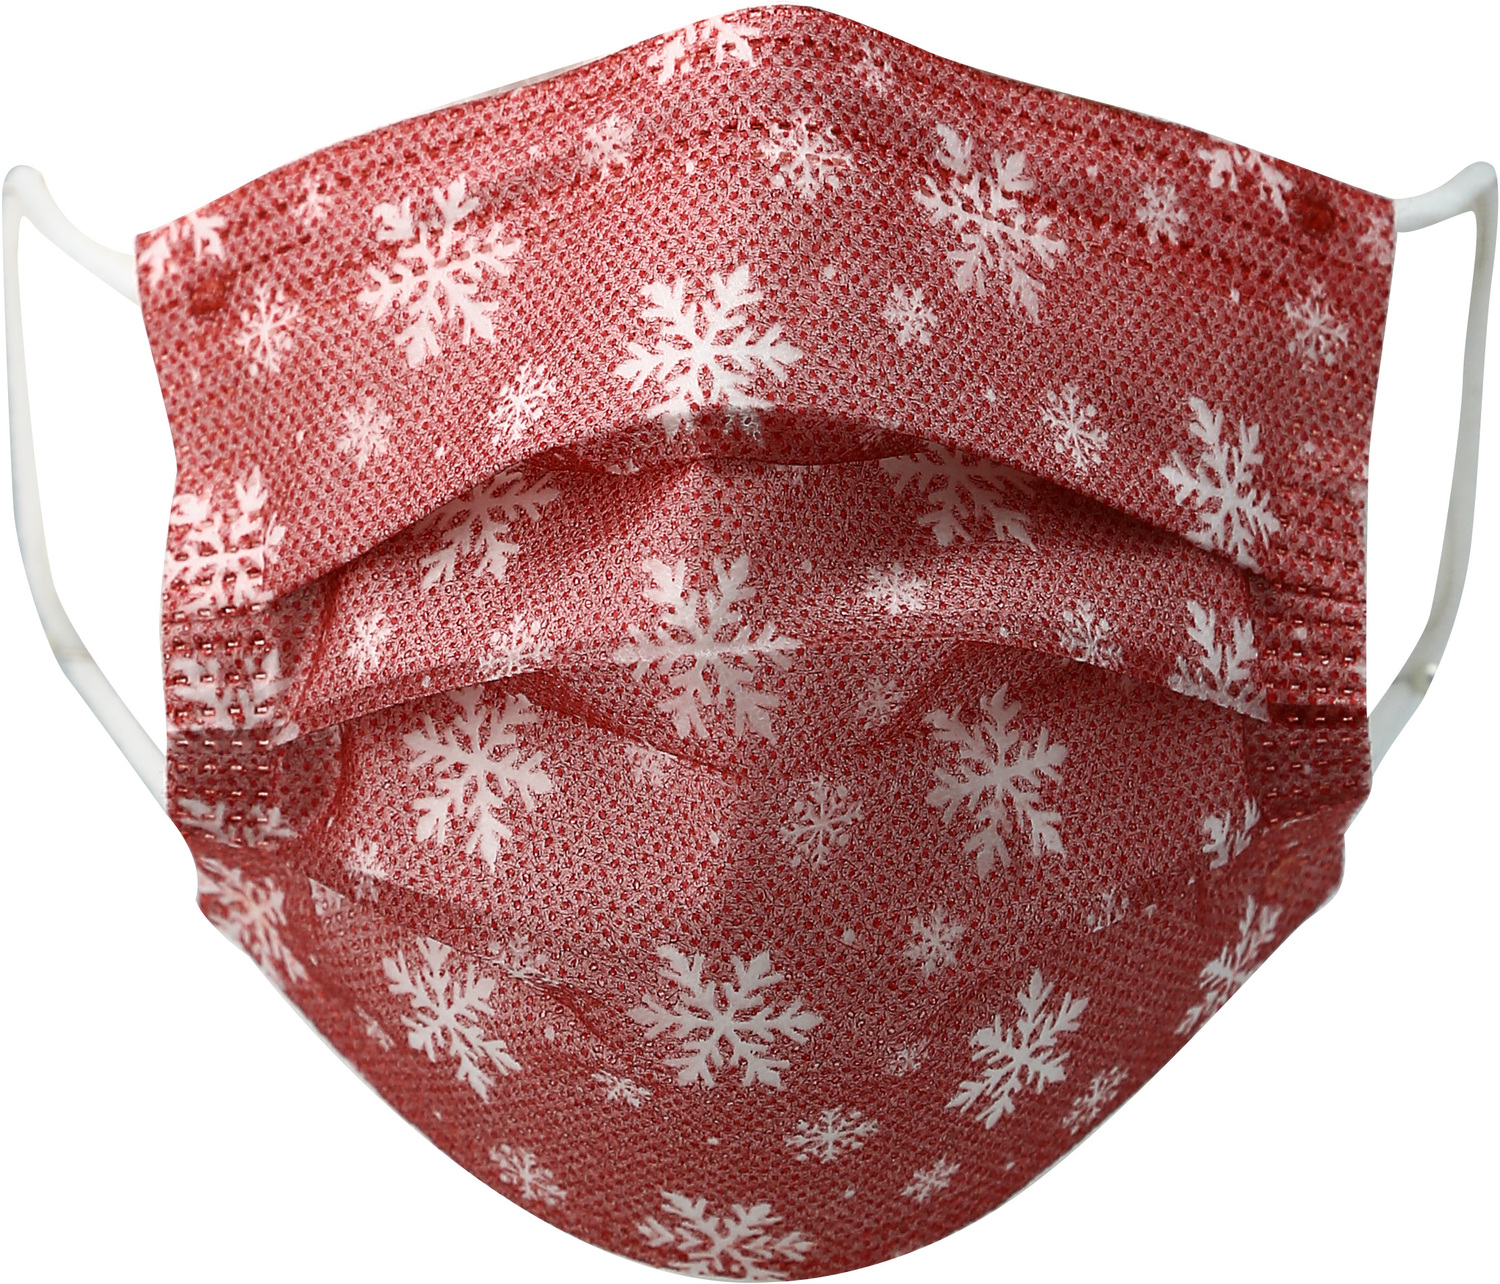 Snowflakes by Pavilion Cares - Snowflakes - Kid's Disposable 3-Layer Face Mask
(Set of 7)